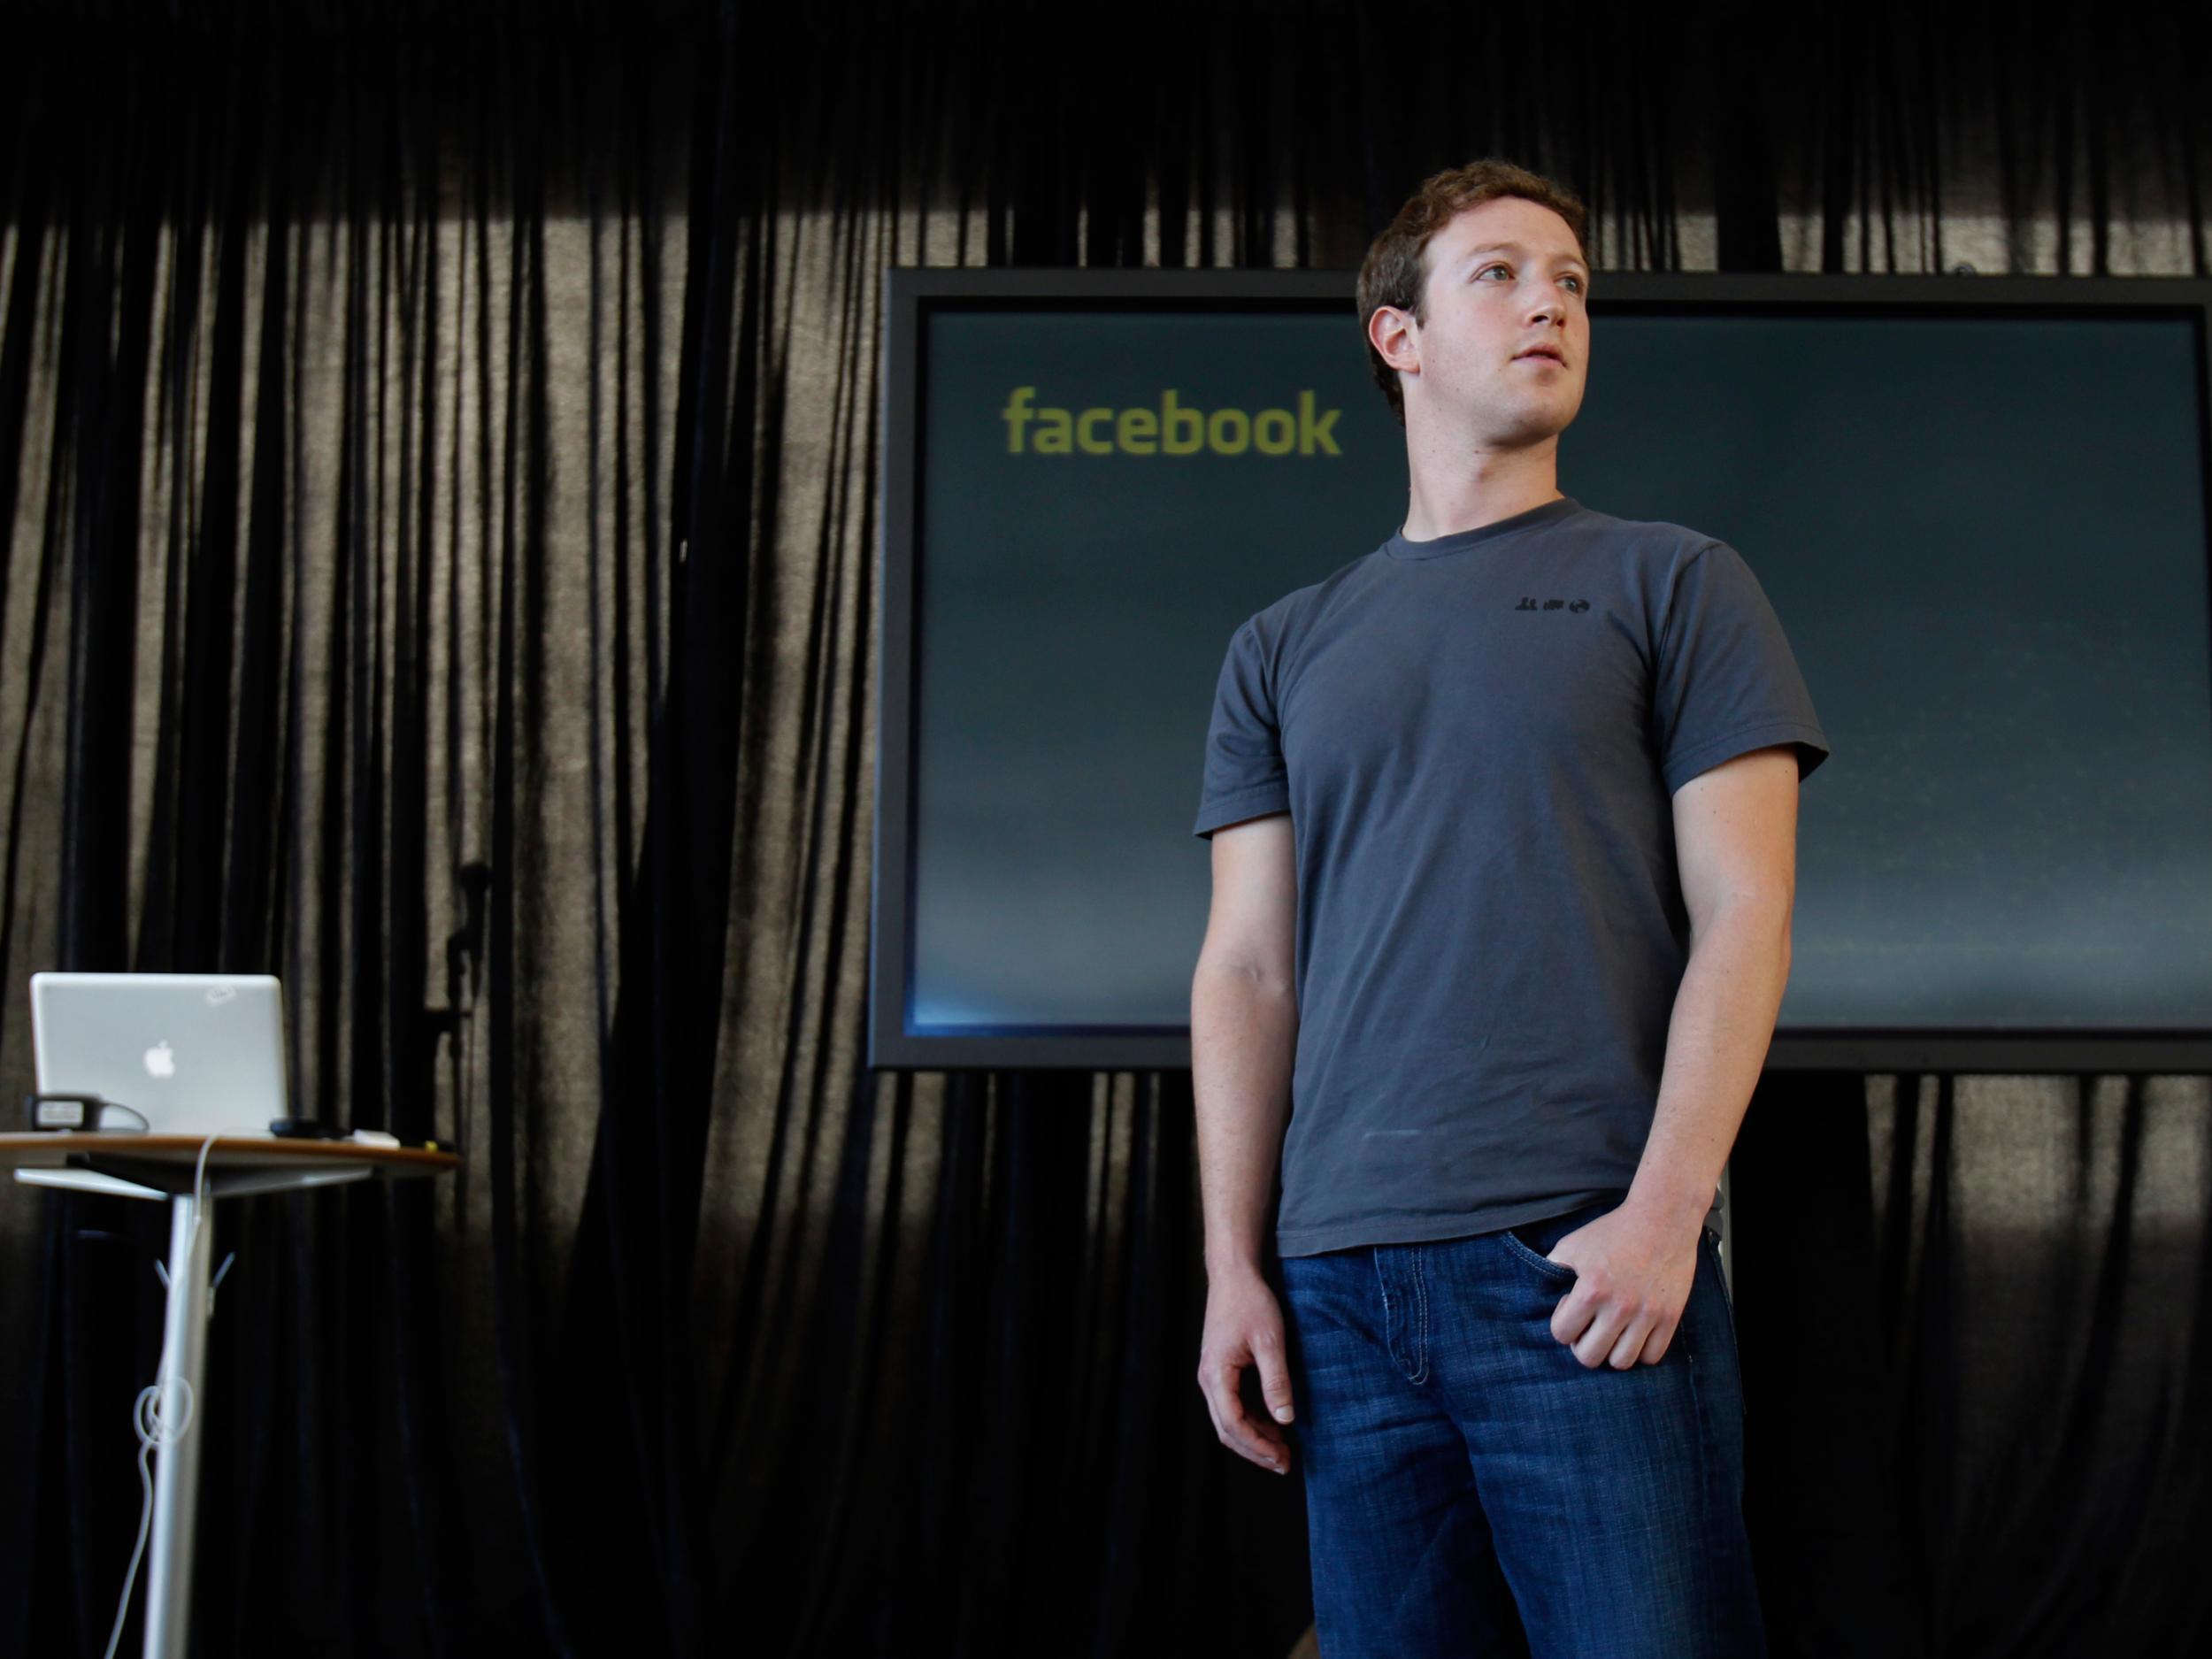 Facebook CEO Mark Zuckerberg listens to a question after introducing a new messaging system during a news conference in San Francisco, California November 15, 2010